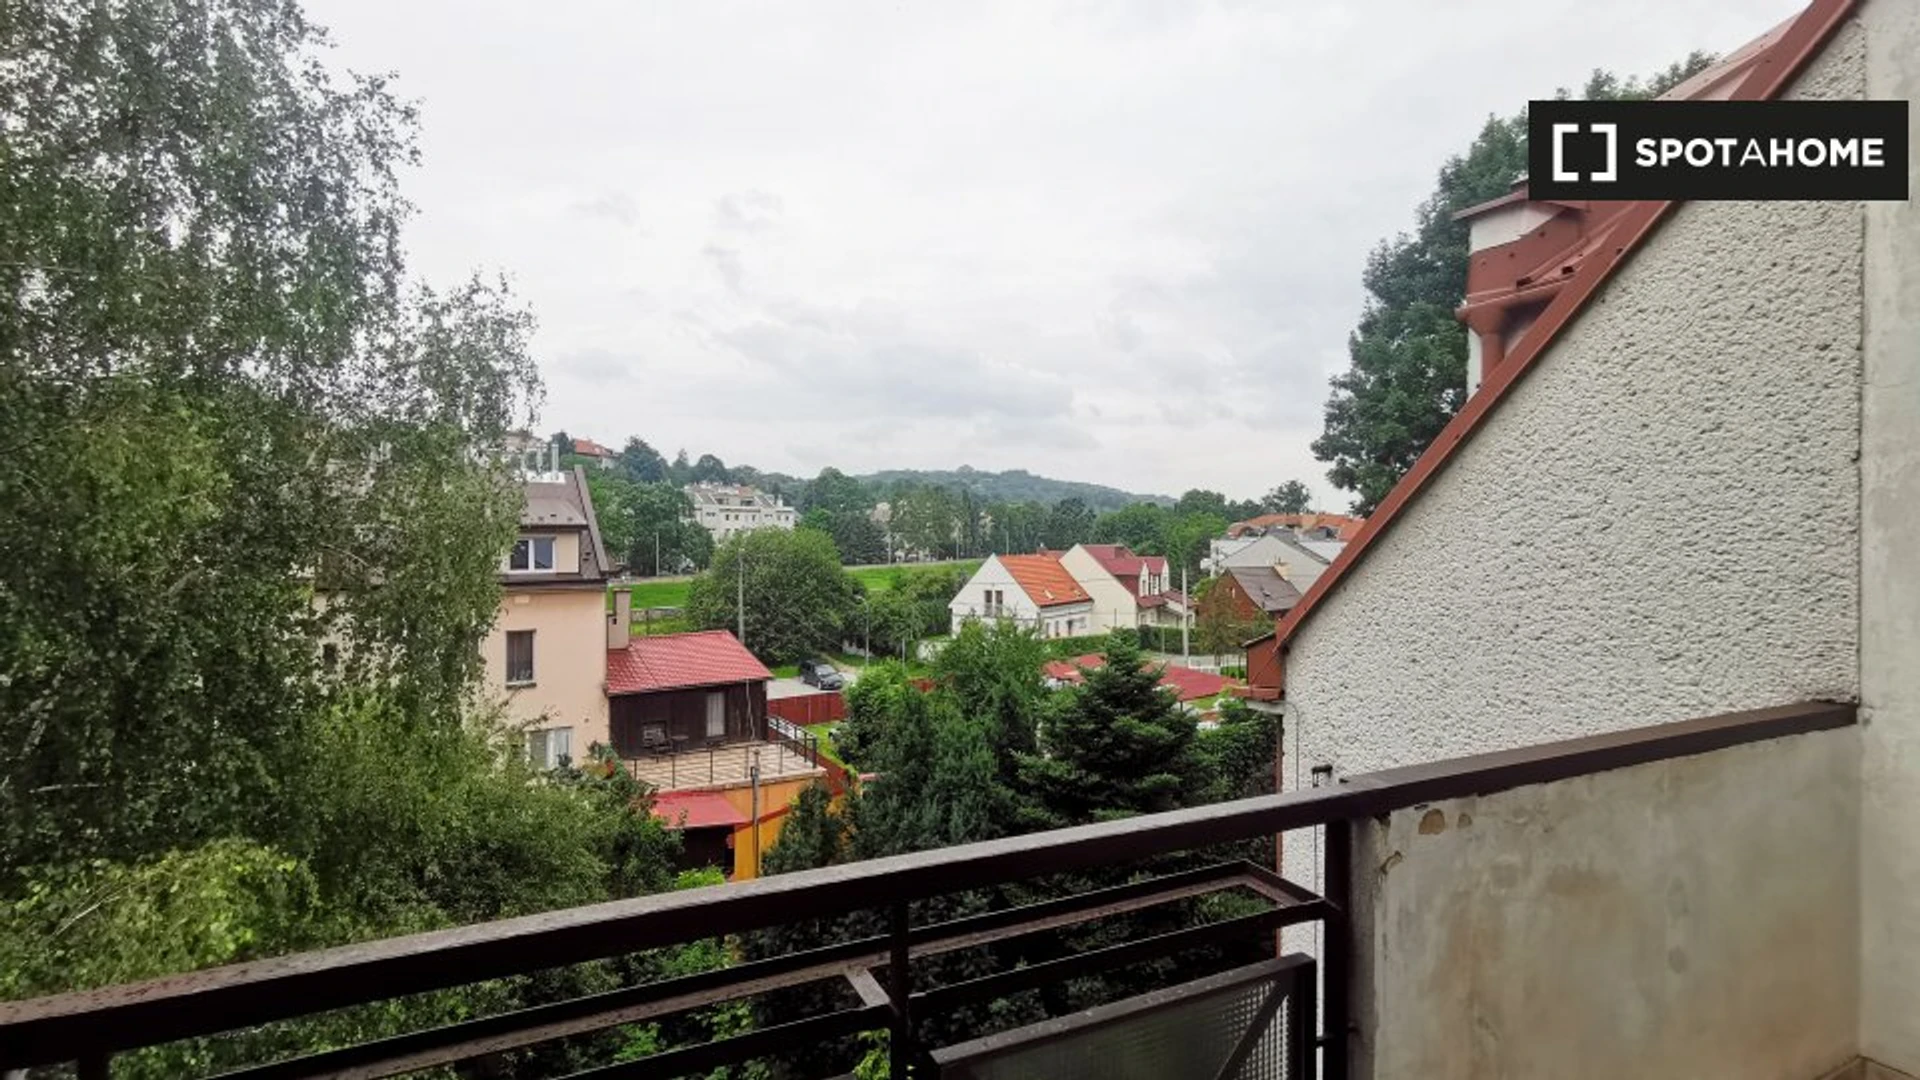 Room for rent with double bed Krakow